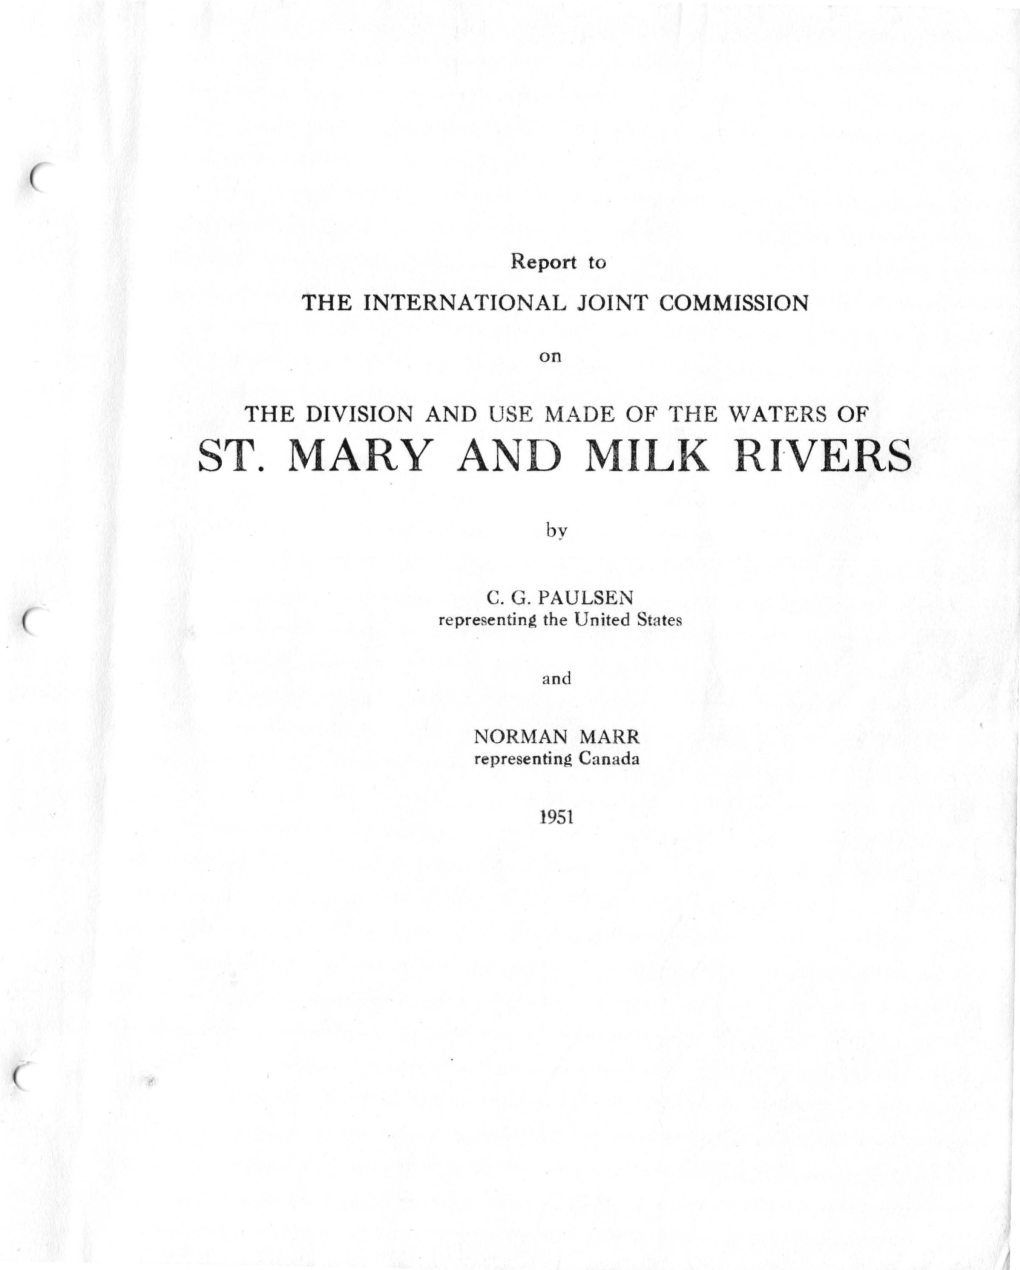 ST. MARY and MILK Rlvers